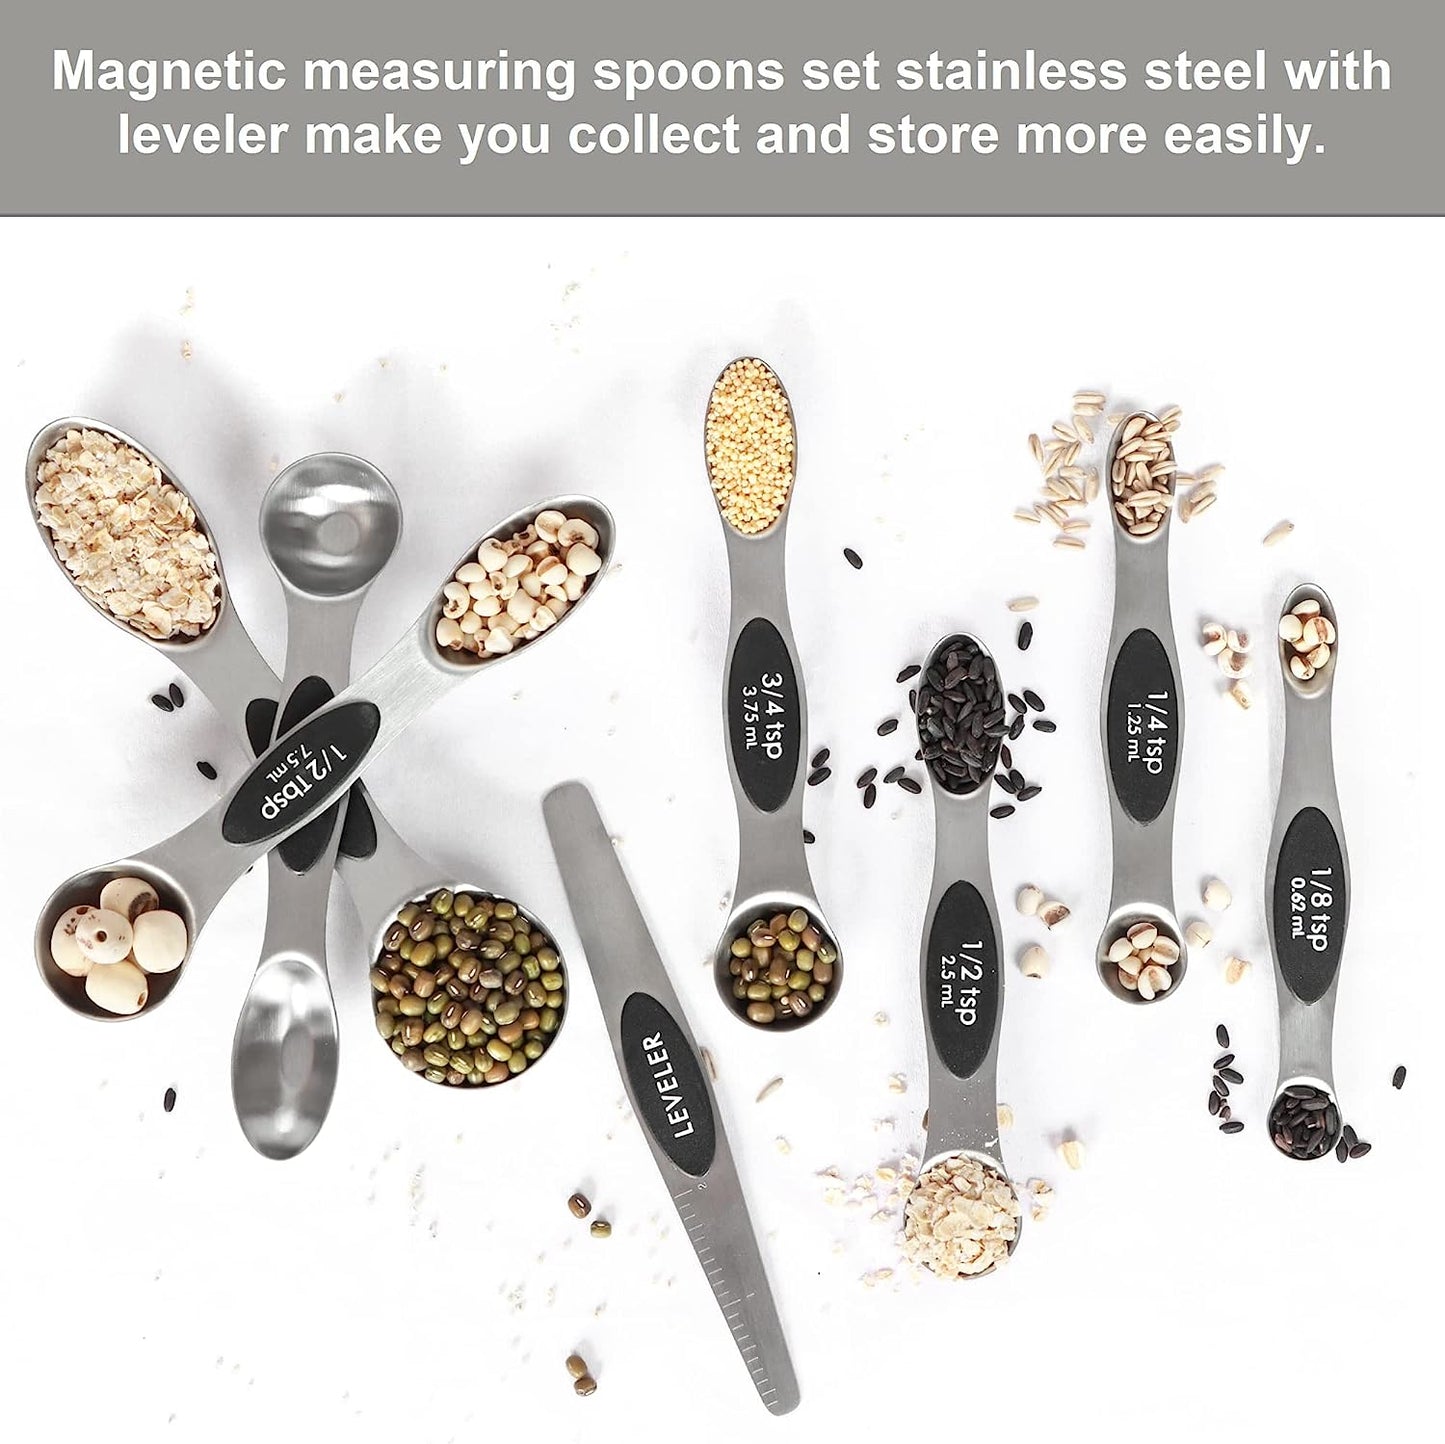 Magnetic Measuring Spoons Set Stainless Steel with Leveler-9pcs Stackable